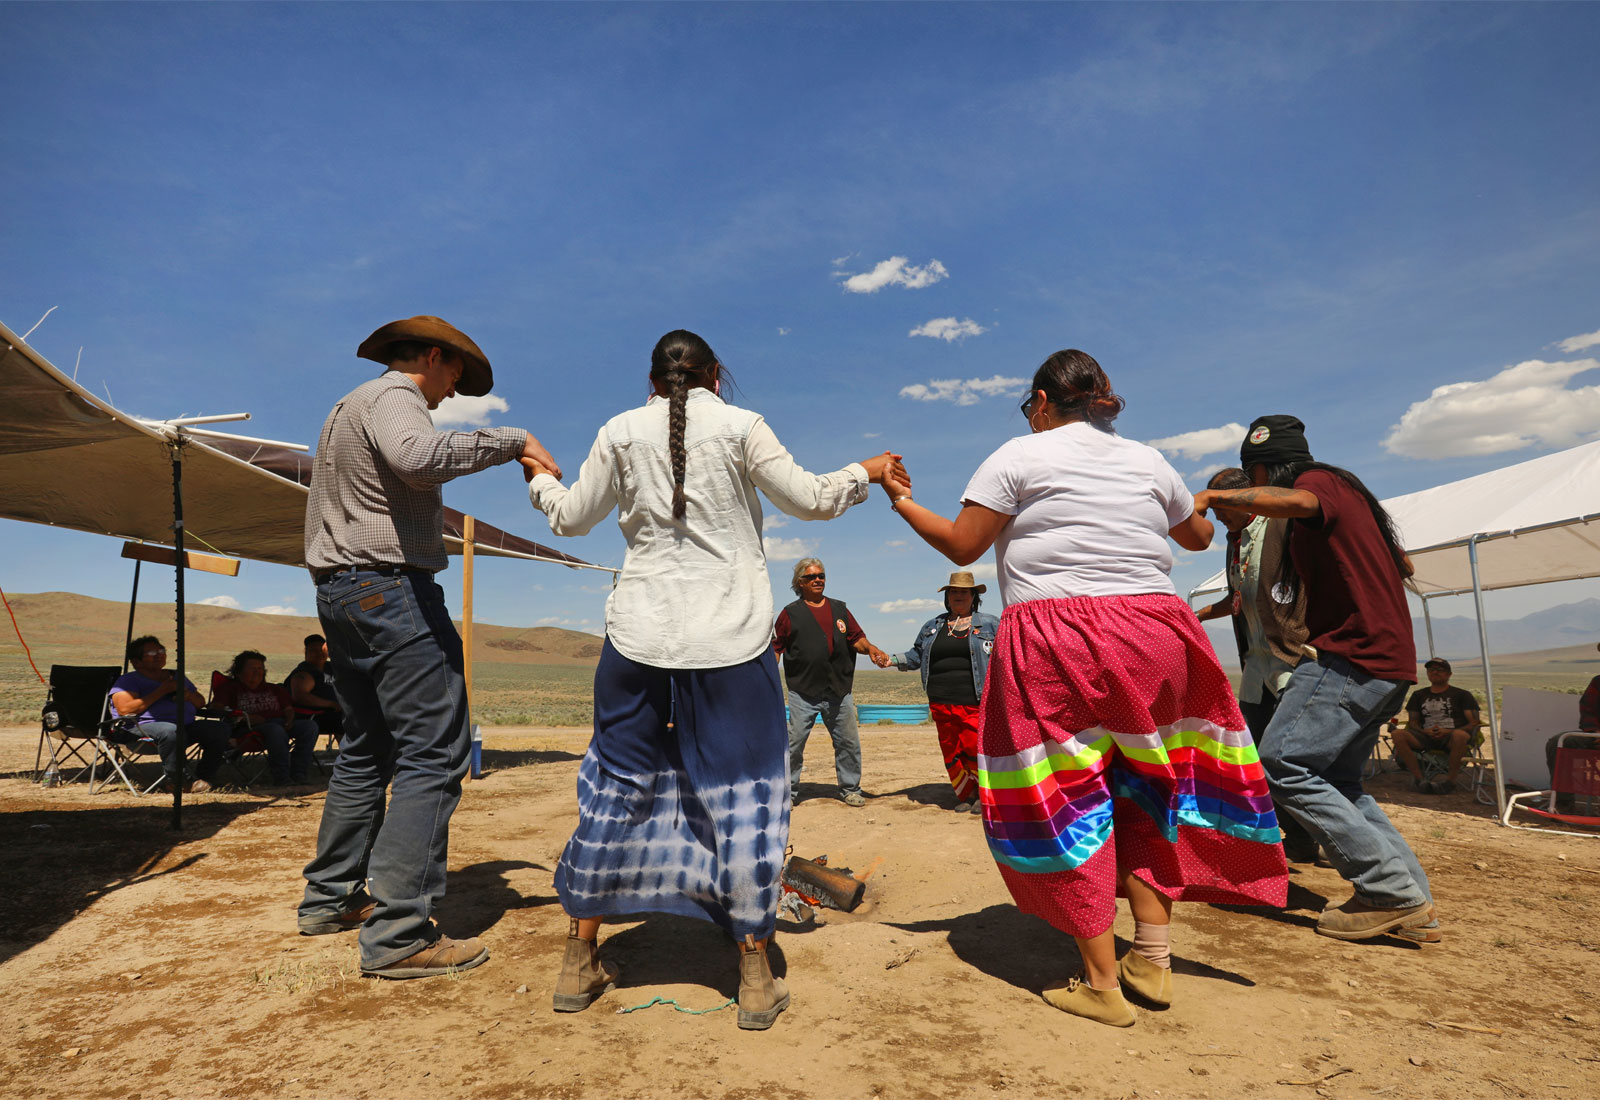 Members of the Fort McDermitt Paiute Shoshone tribe and supporters gather for a circle dance for healing